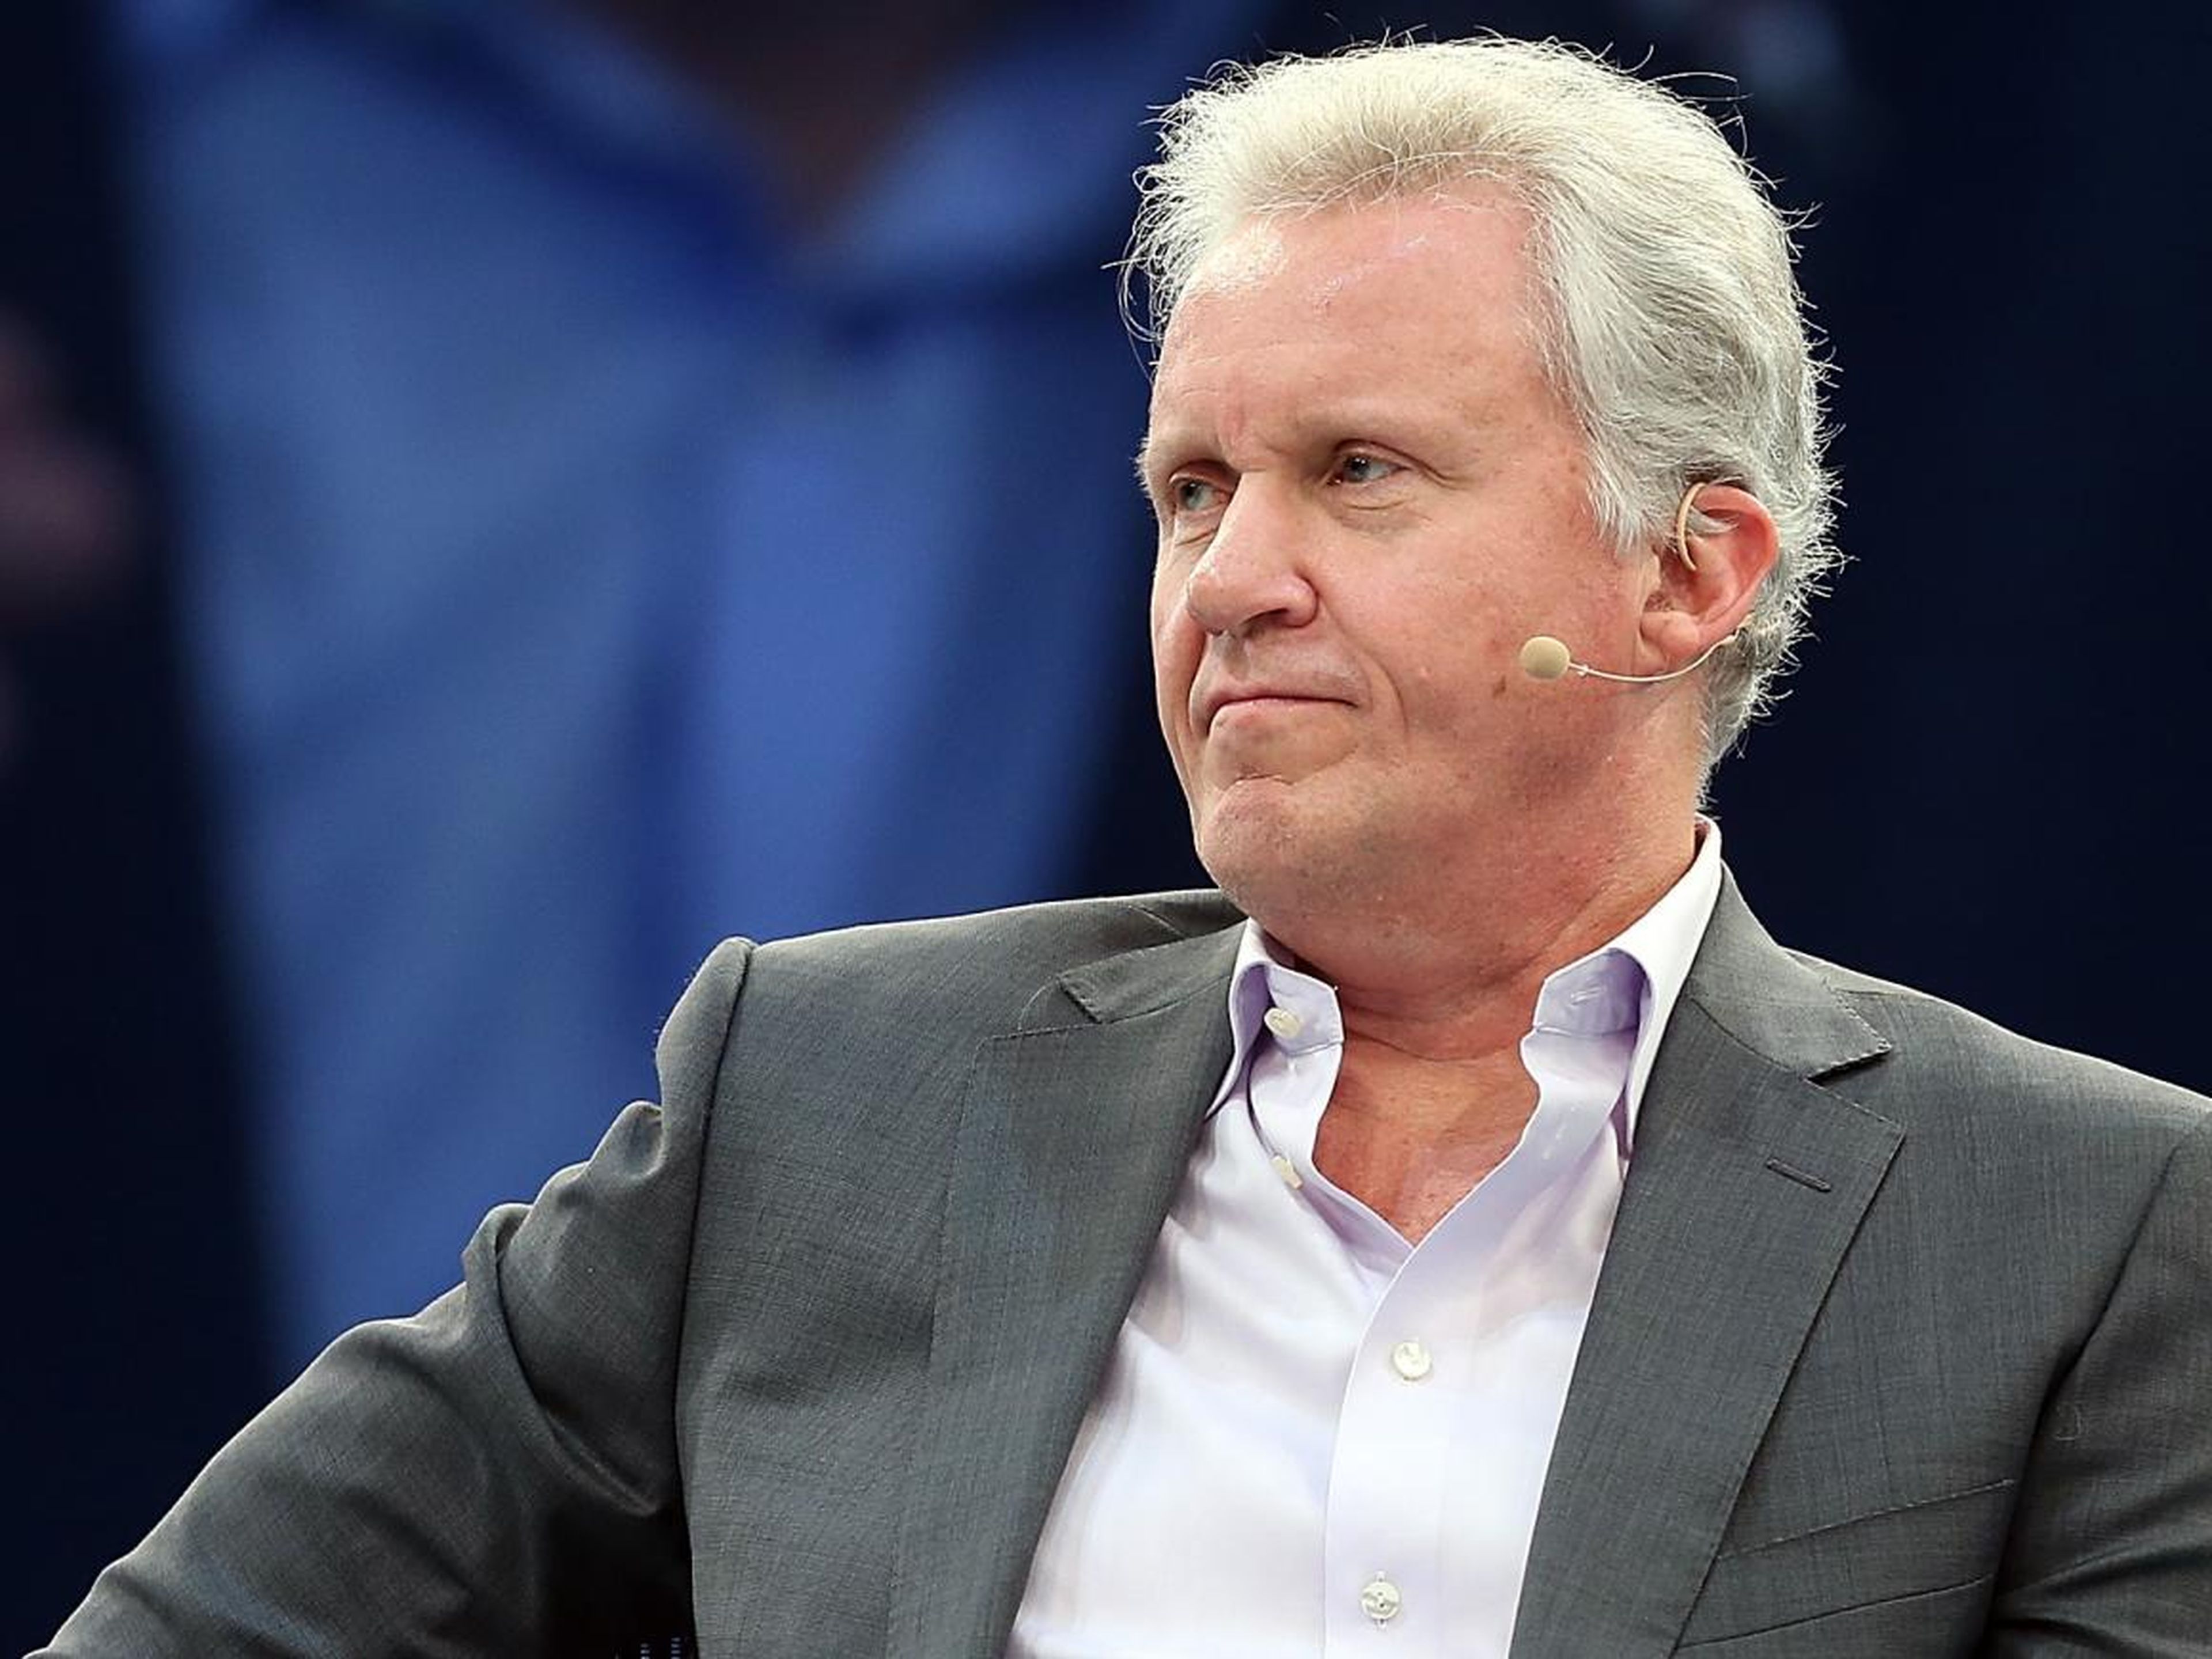 Former GE CEO Jeff Immelt has said he worked 100-hour weeks 24 years in a row.